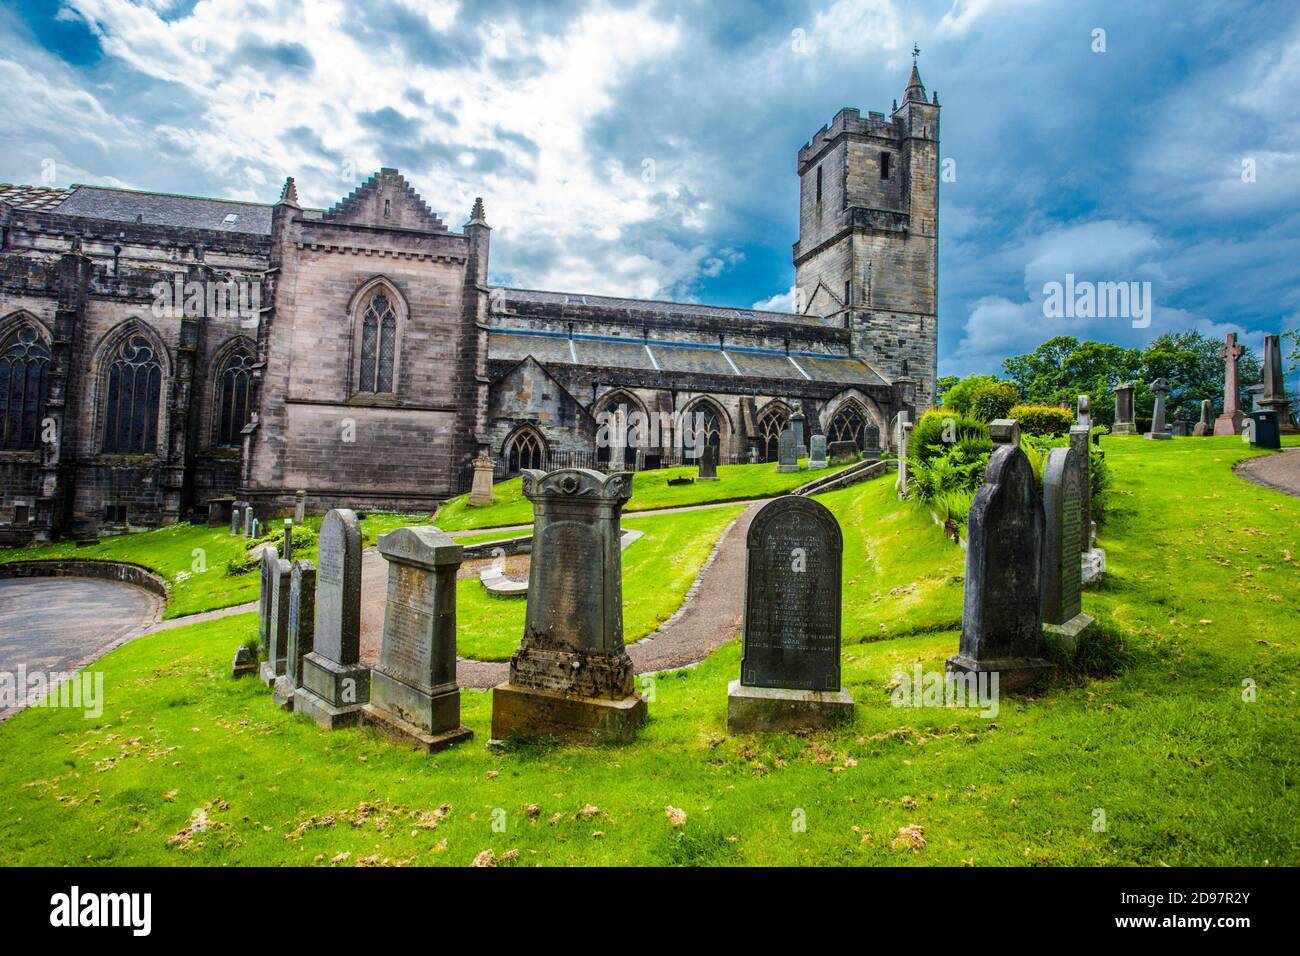 Church of the Holy Rude, Cemetery, Stirling town, Scotland, United Kingdom, Europe. Stock Photo